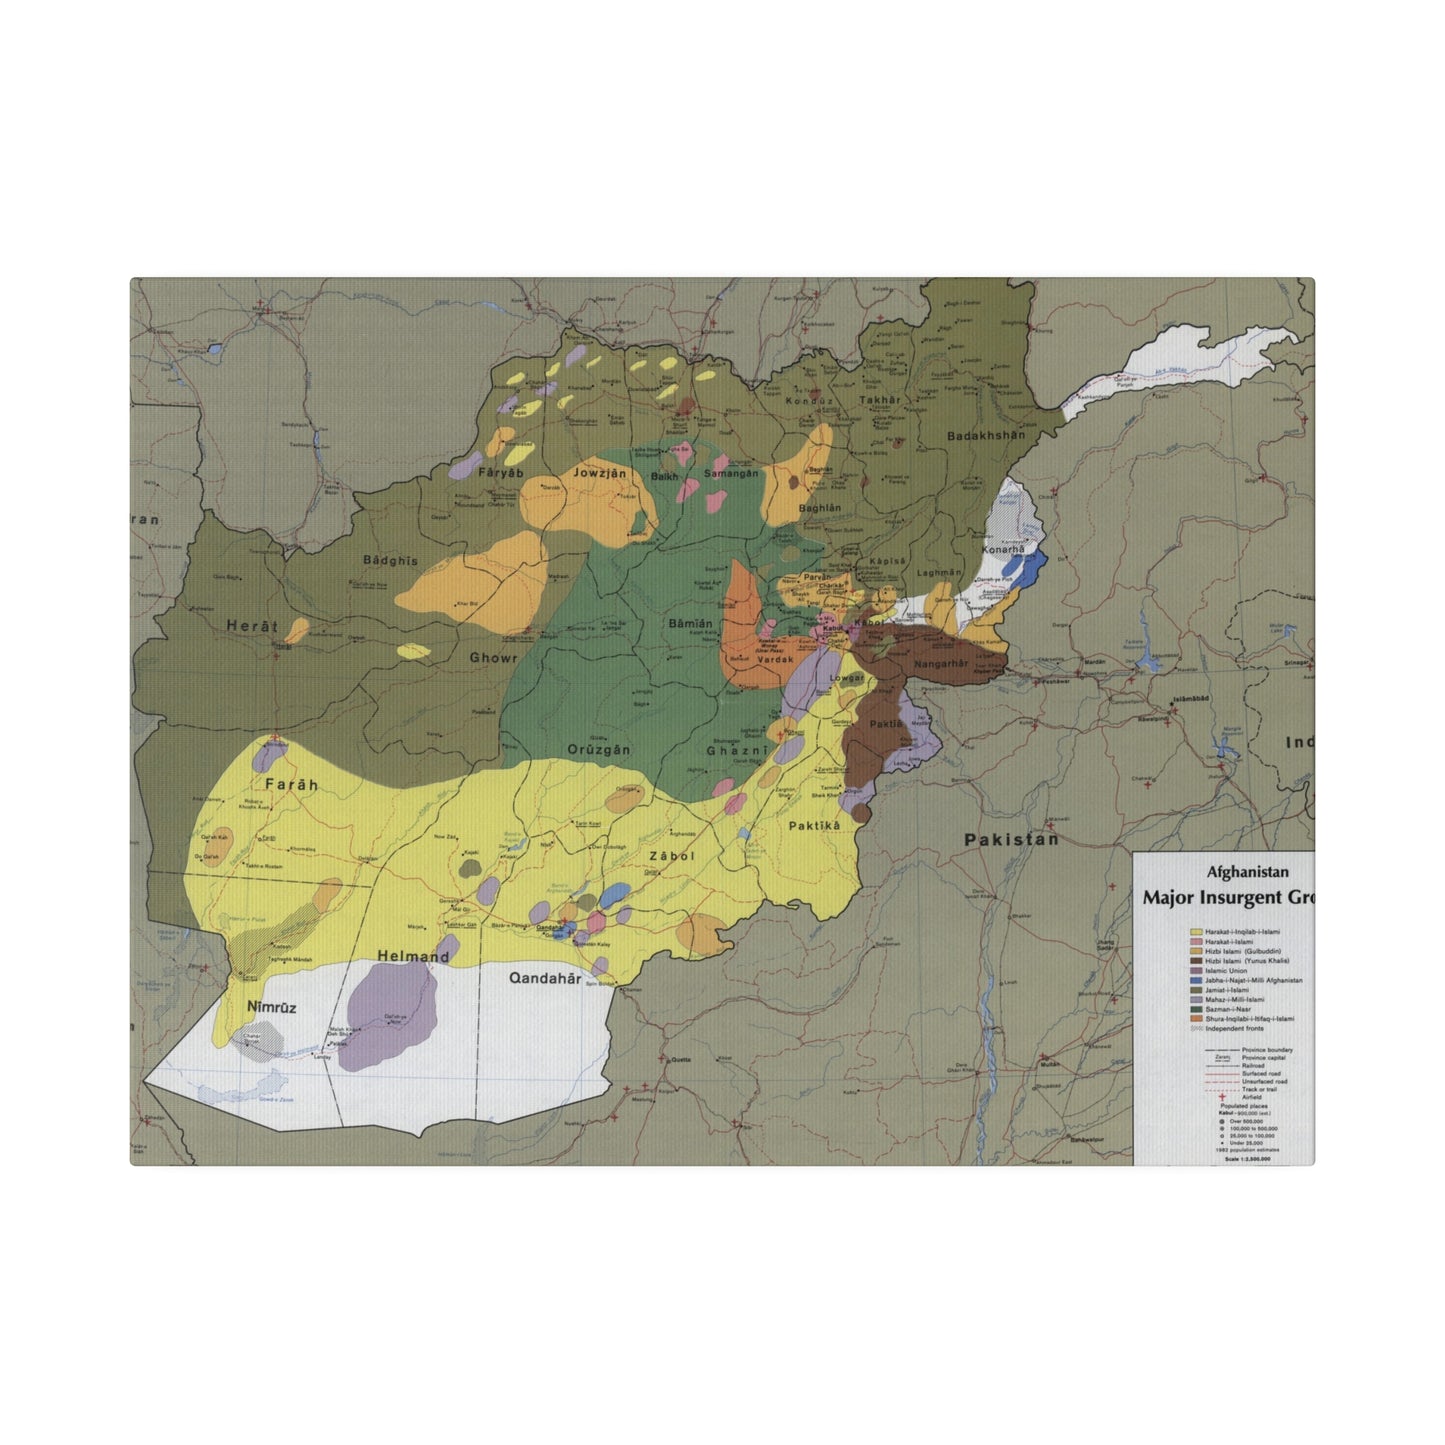 Afghanistan Major Insurgent Groups, CIA, 1985